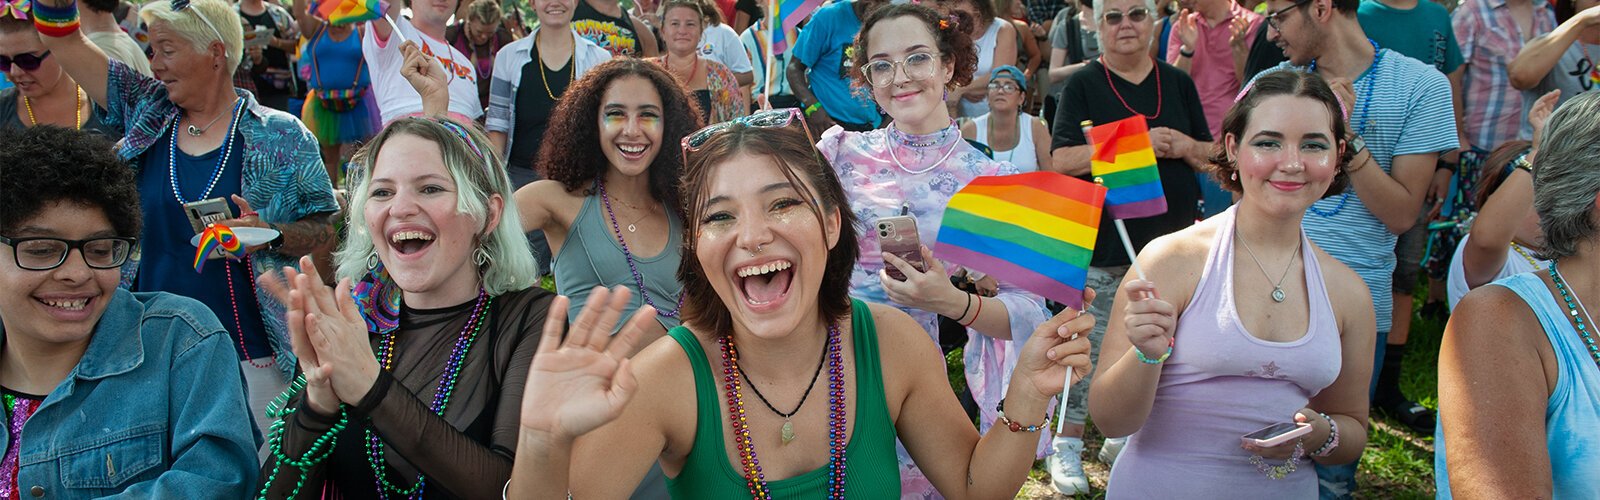 Along the entire St. Pete Pride Parade route, the crowd enjoyed themselves.